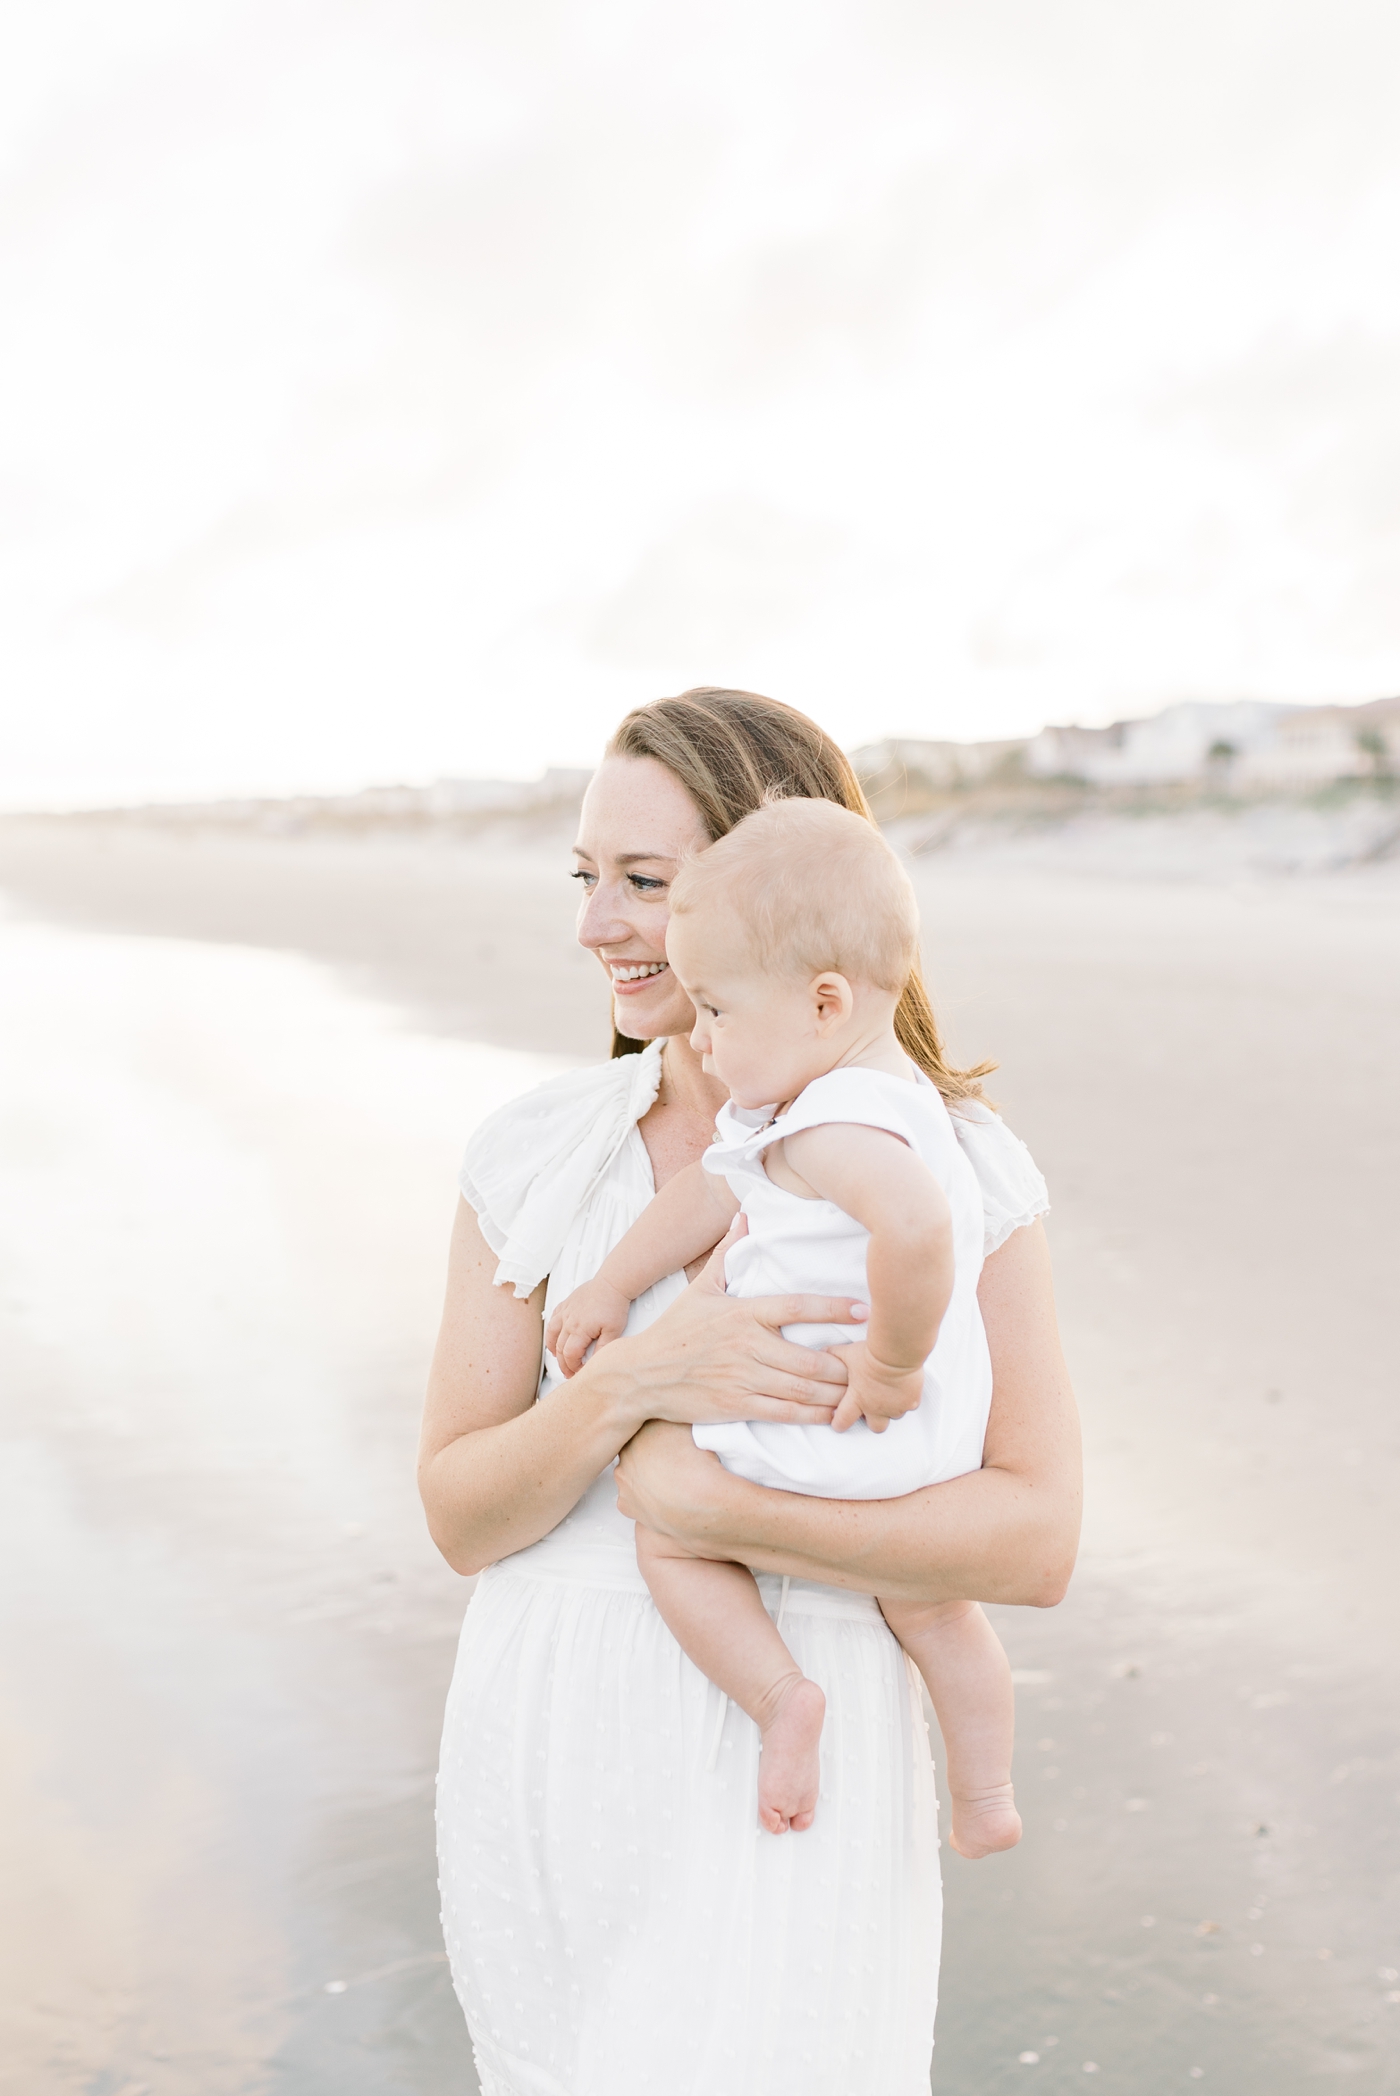 Mom holding her baby boy on the beach | Photo by Caitlyn Motycka Photography.